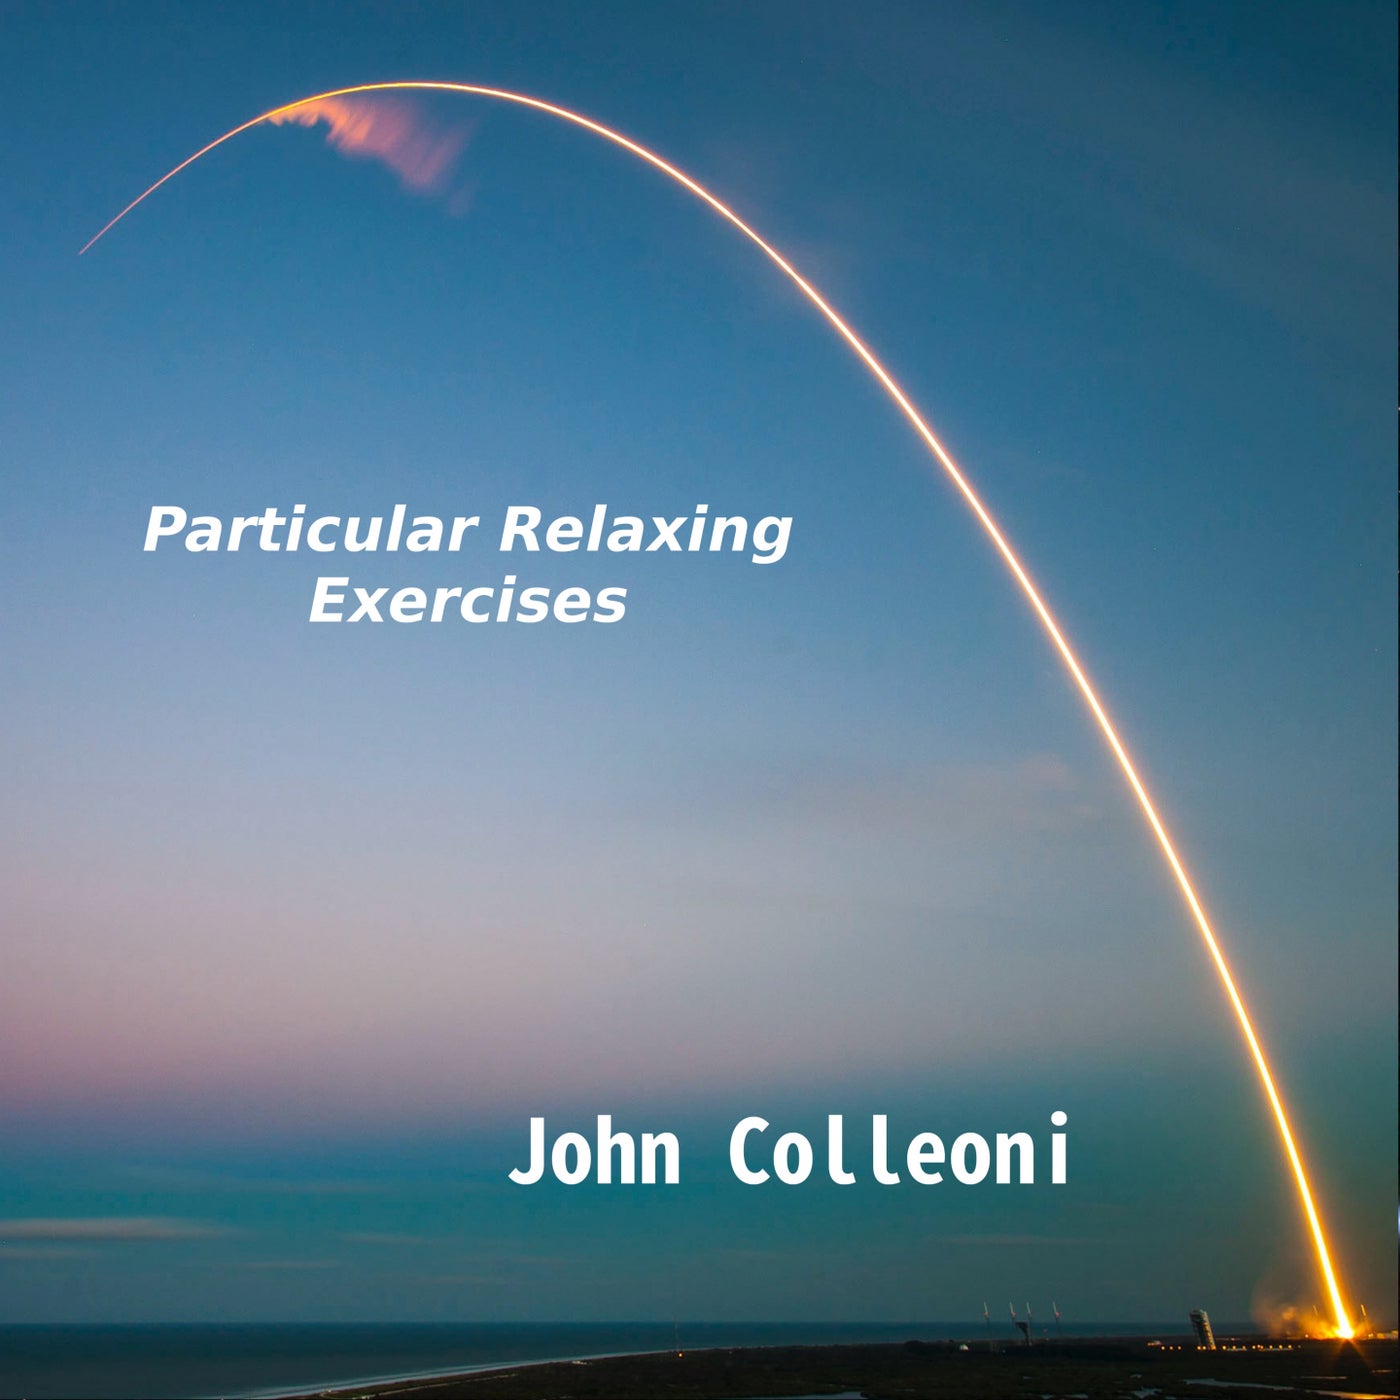 Particular Relaxing Exercises